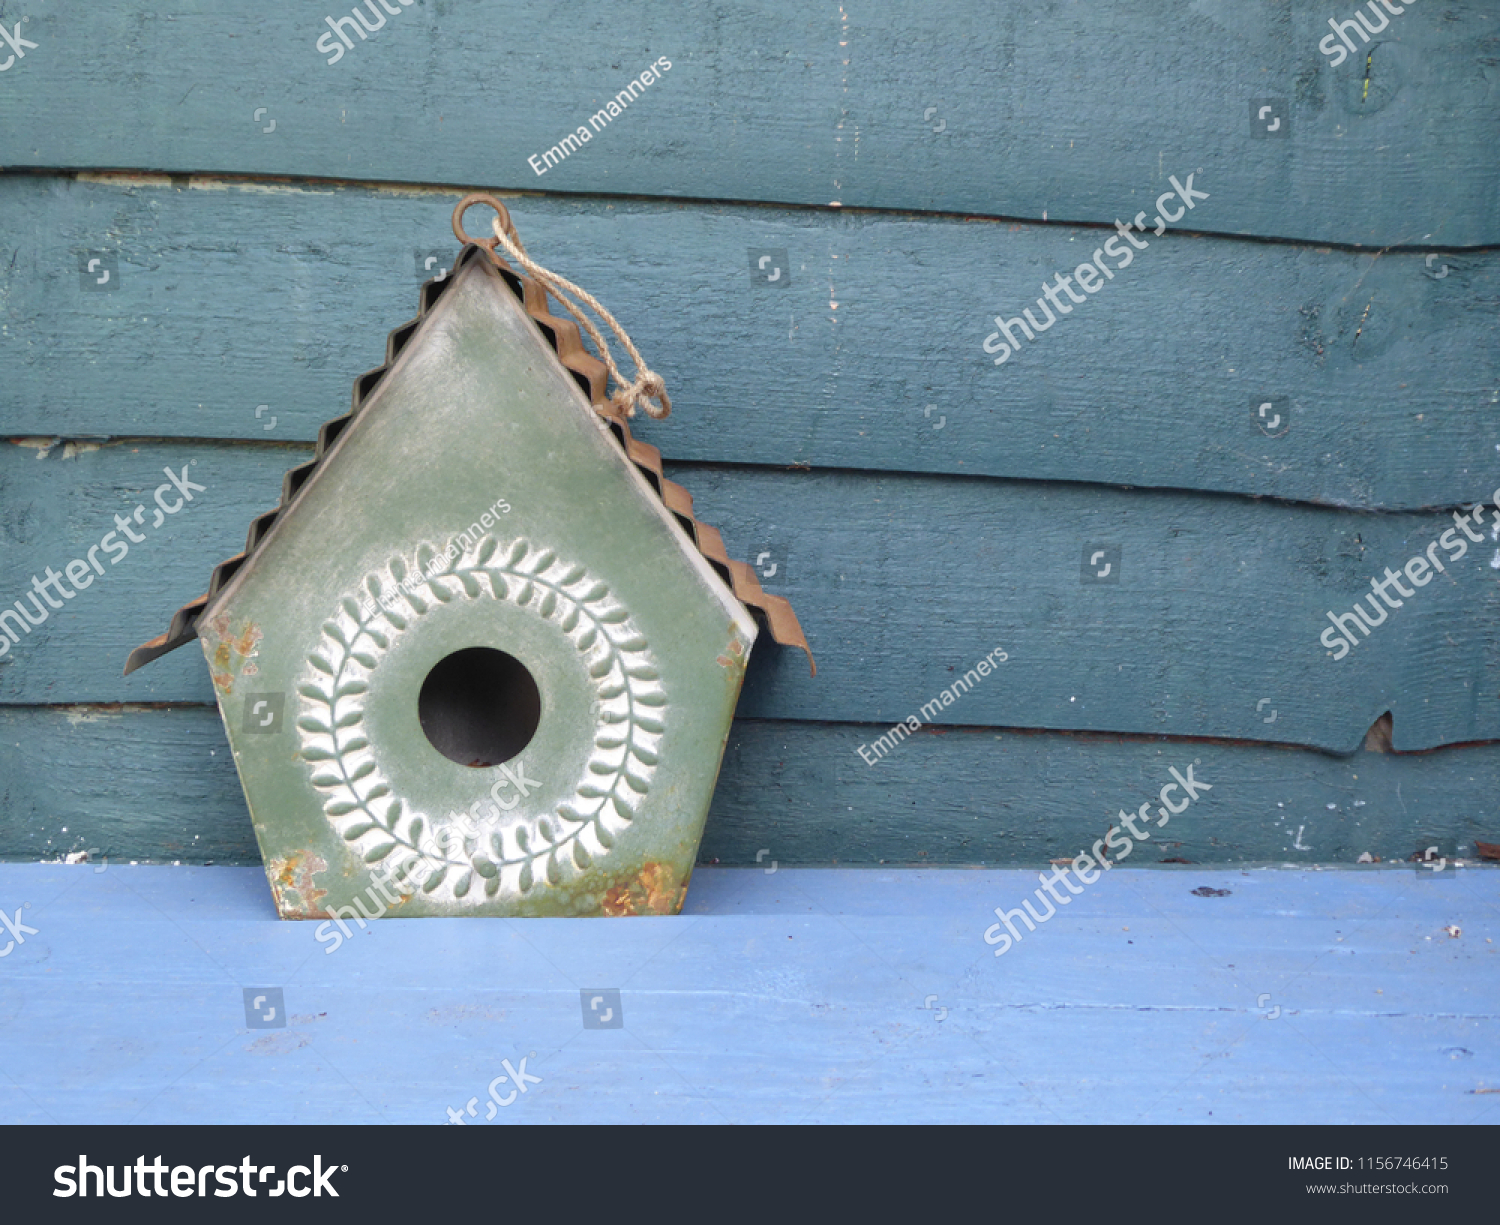 A French shabby chic style decorative green metal birdhouse on a blue wooden bench with wood panel background , a colourful garden decoration  #1156746415